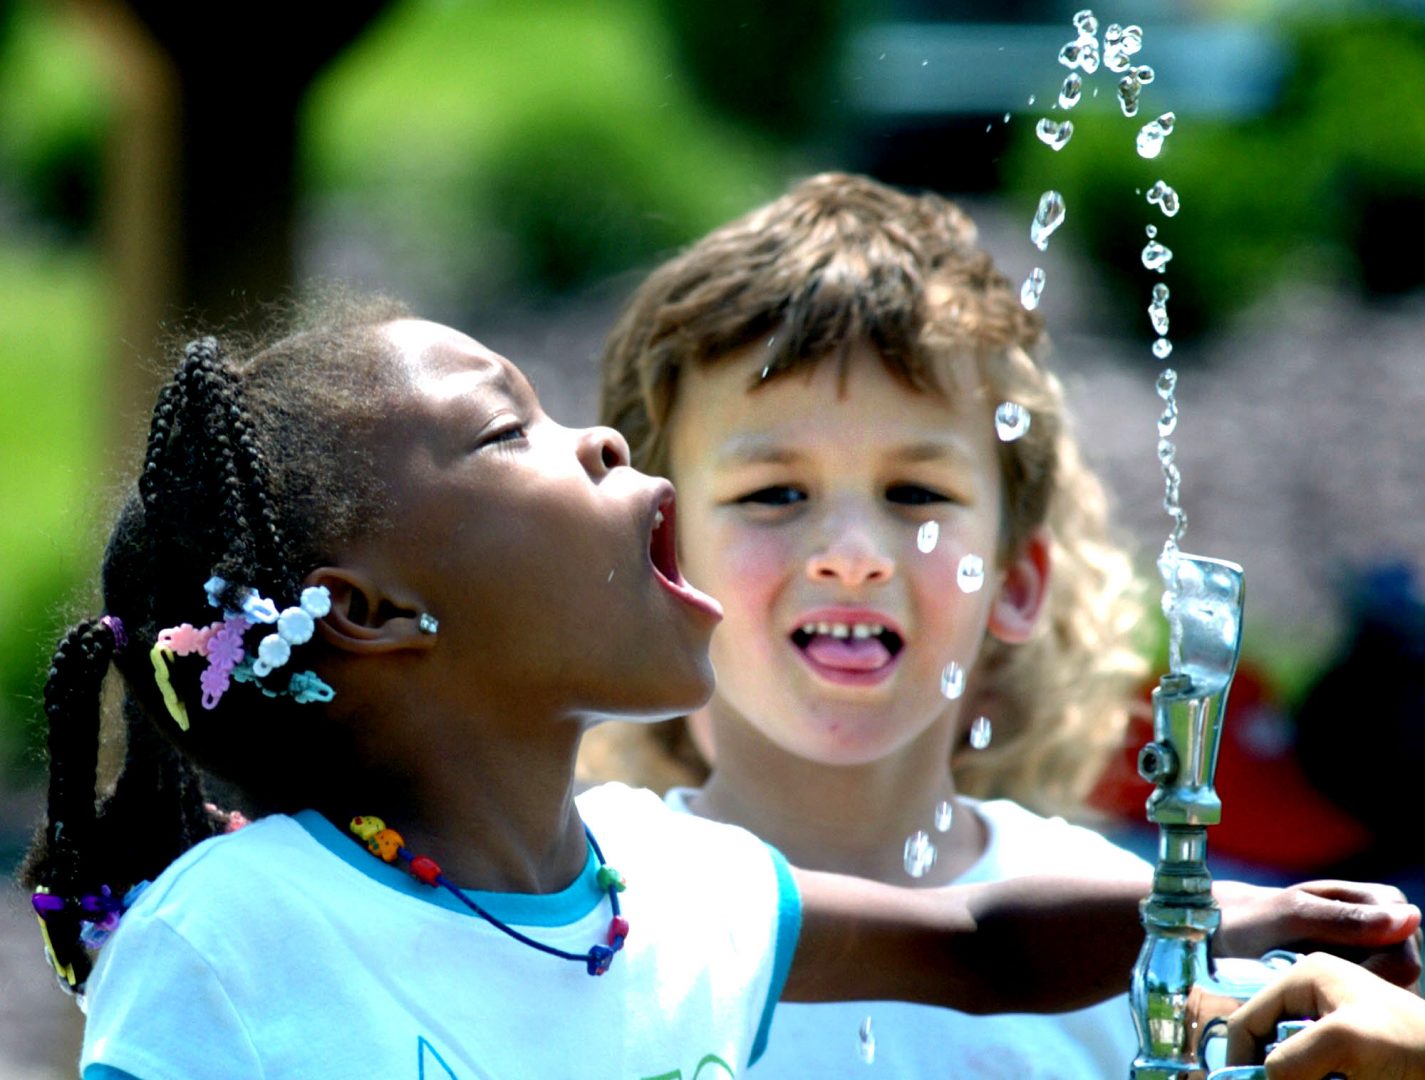 FILE - In this June 3, 2008 file photo, Liberty Valley Elementary School, then, kindergarten student Tianna Swisher moves into an arc of water for a drink at the water fountain at Montour Preserve, near Washingtonville, Pa. , while classmate Eli Zakarian awaits his turn. Consumers know less about the water they pay dearly for in bottles than the tap water they can drink almost for free because they're regulated differently, the Government Accountability Office and a group of scientists say in reports being released Wednesday, July 8, 2009.